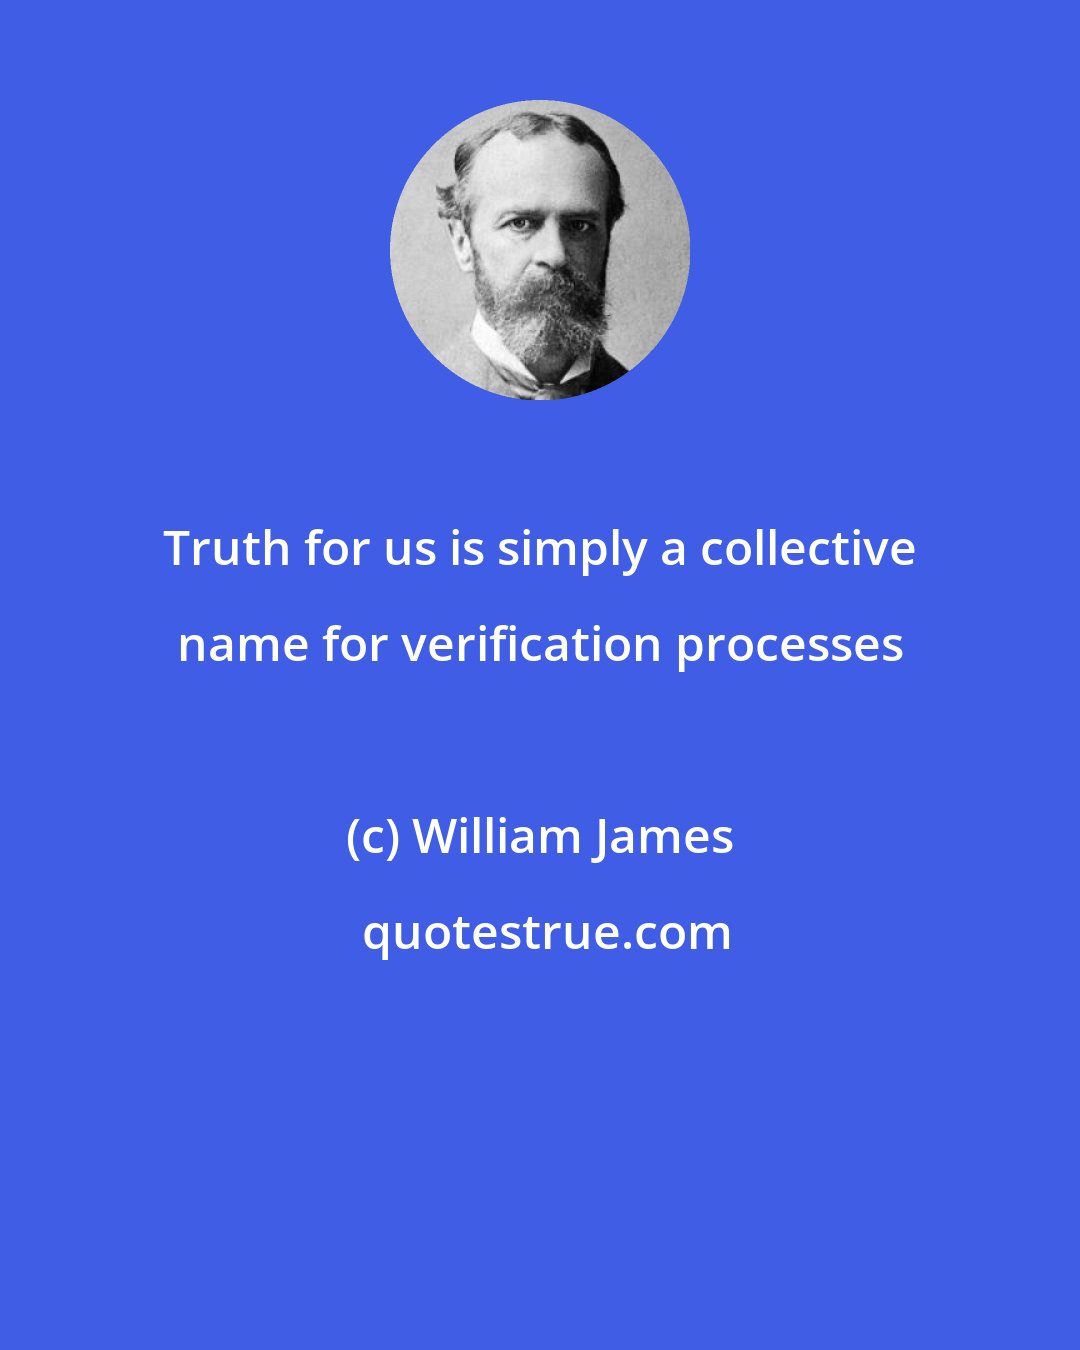 William James: Truth for us is simply a collective name for verification processes